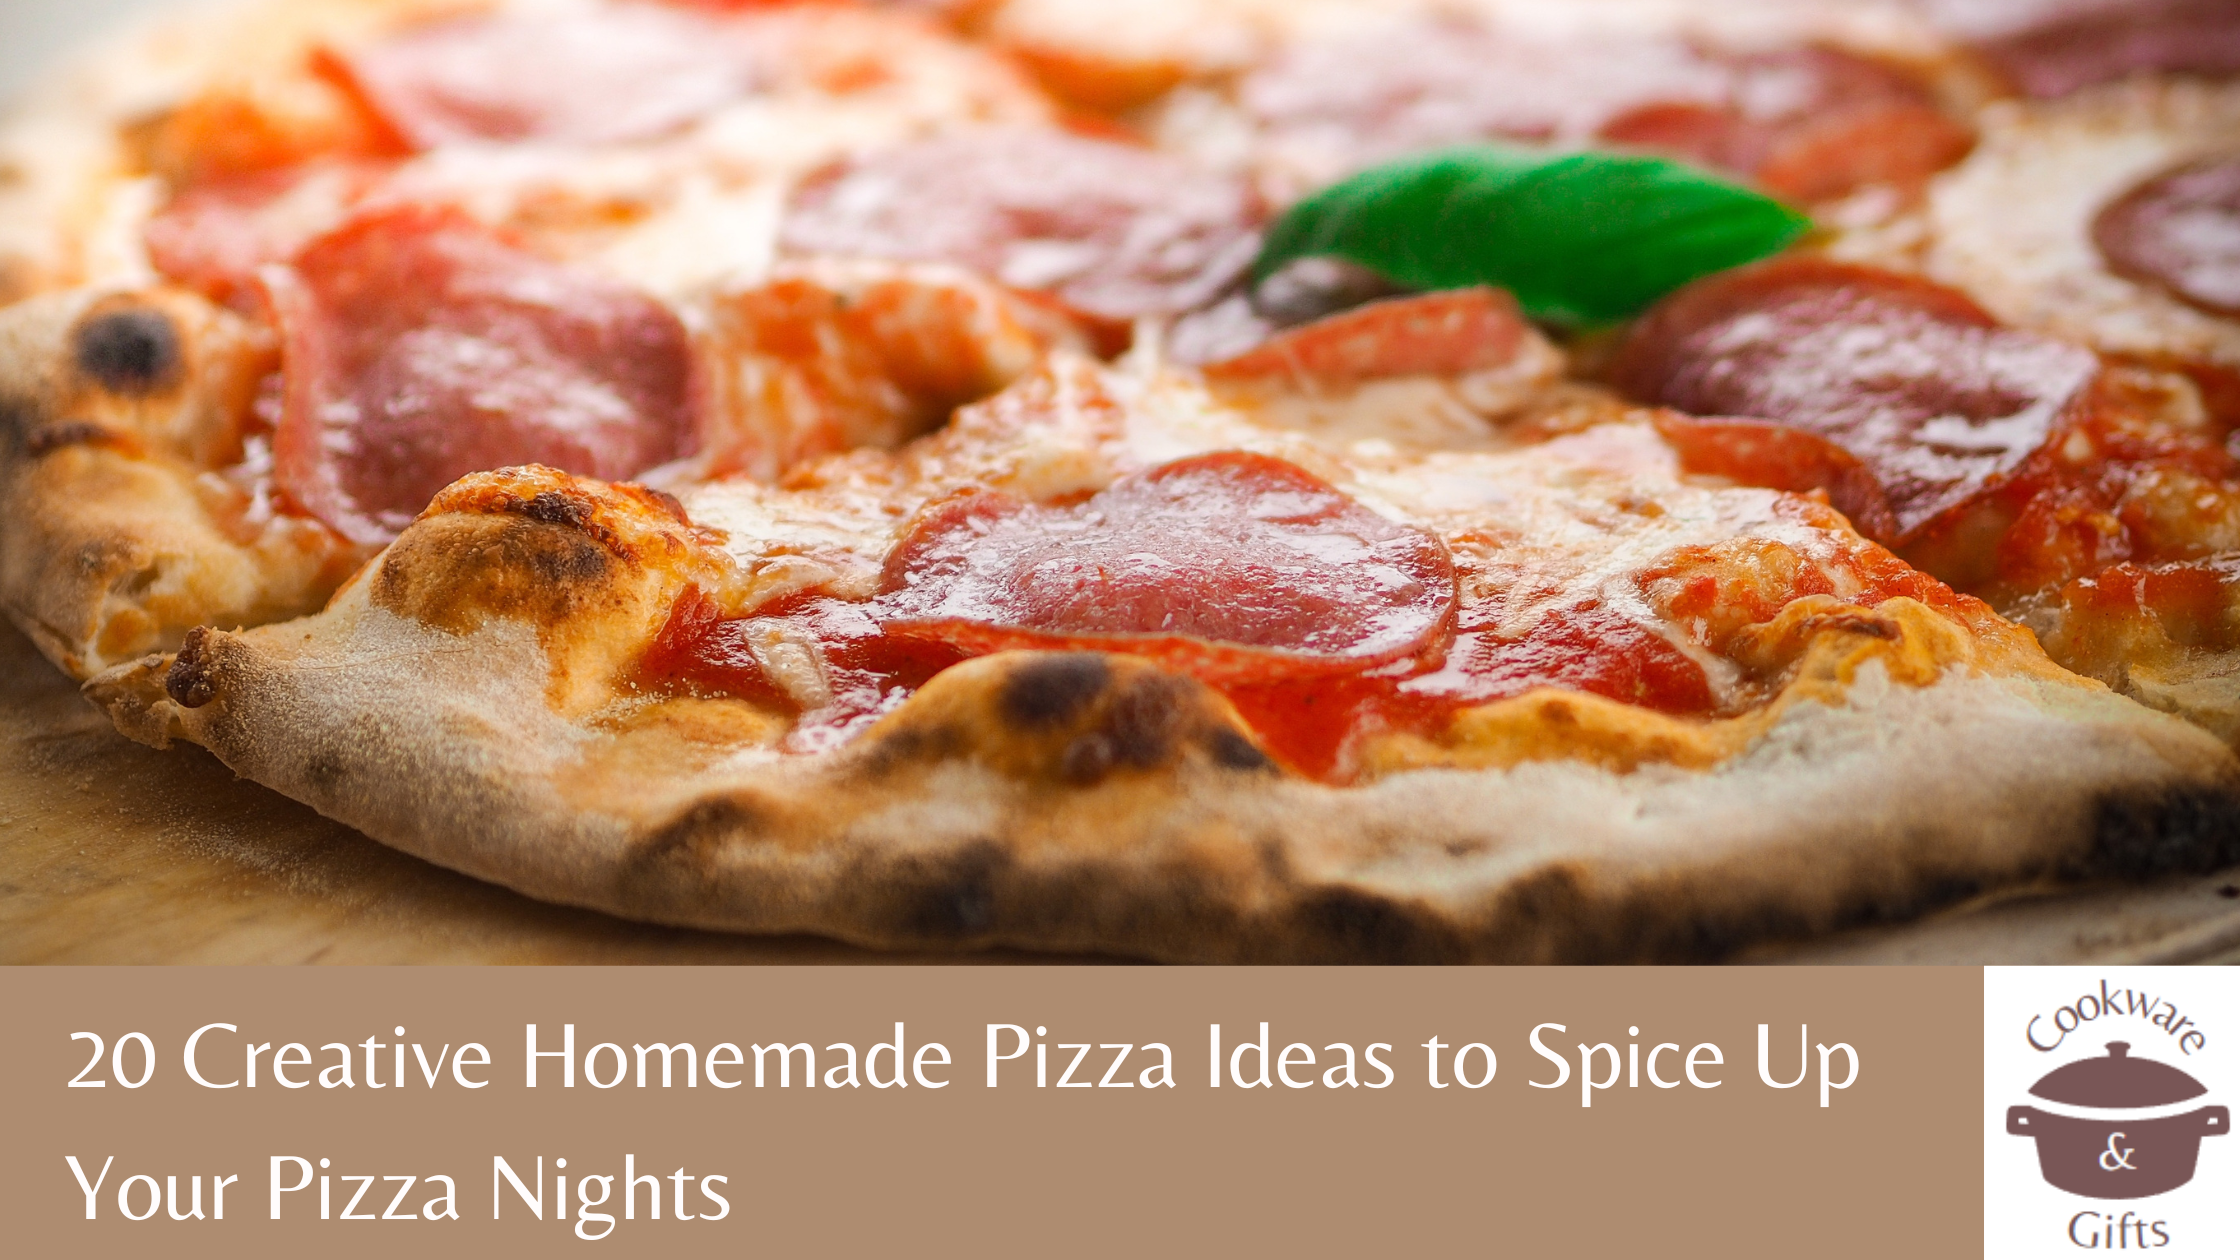 20 Creative Homemade Pizza Ideas to Spice Up Your Pizza Night